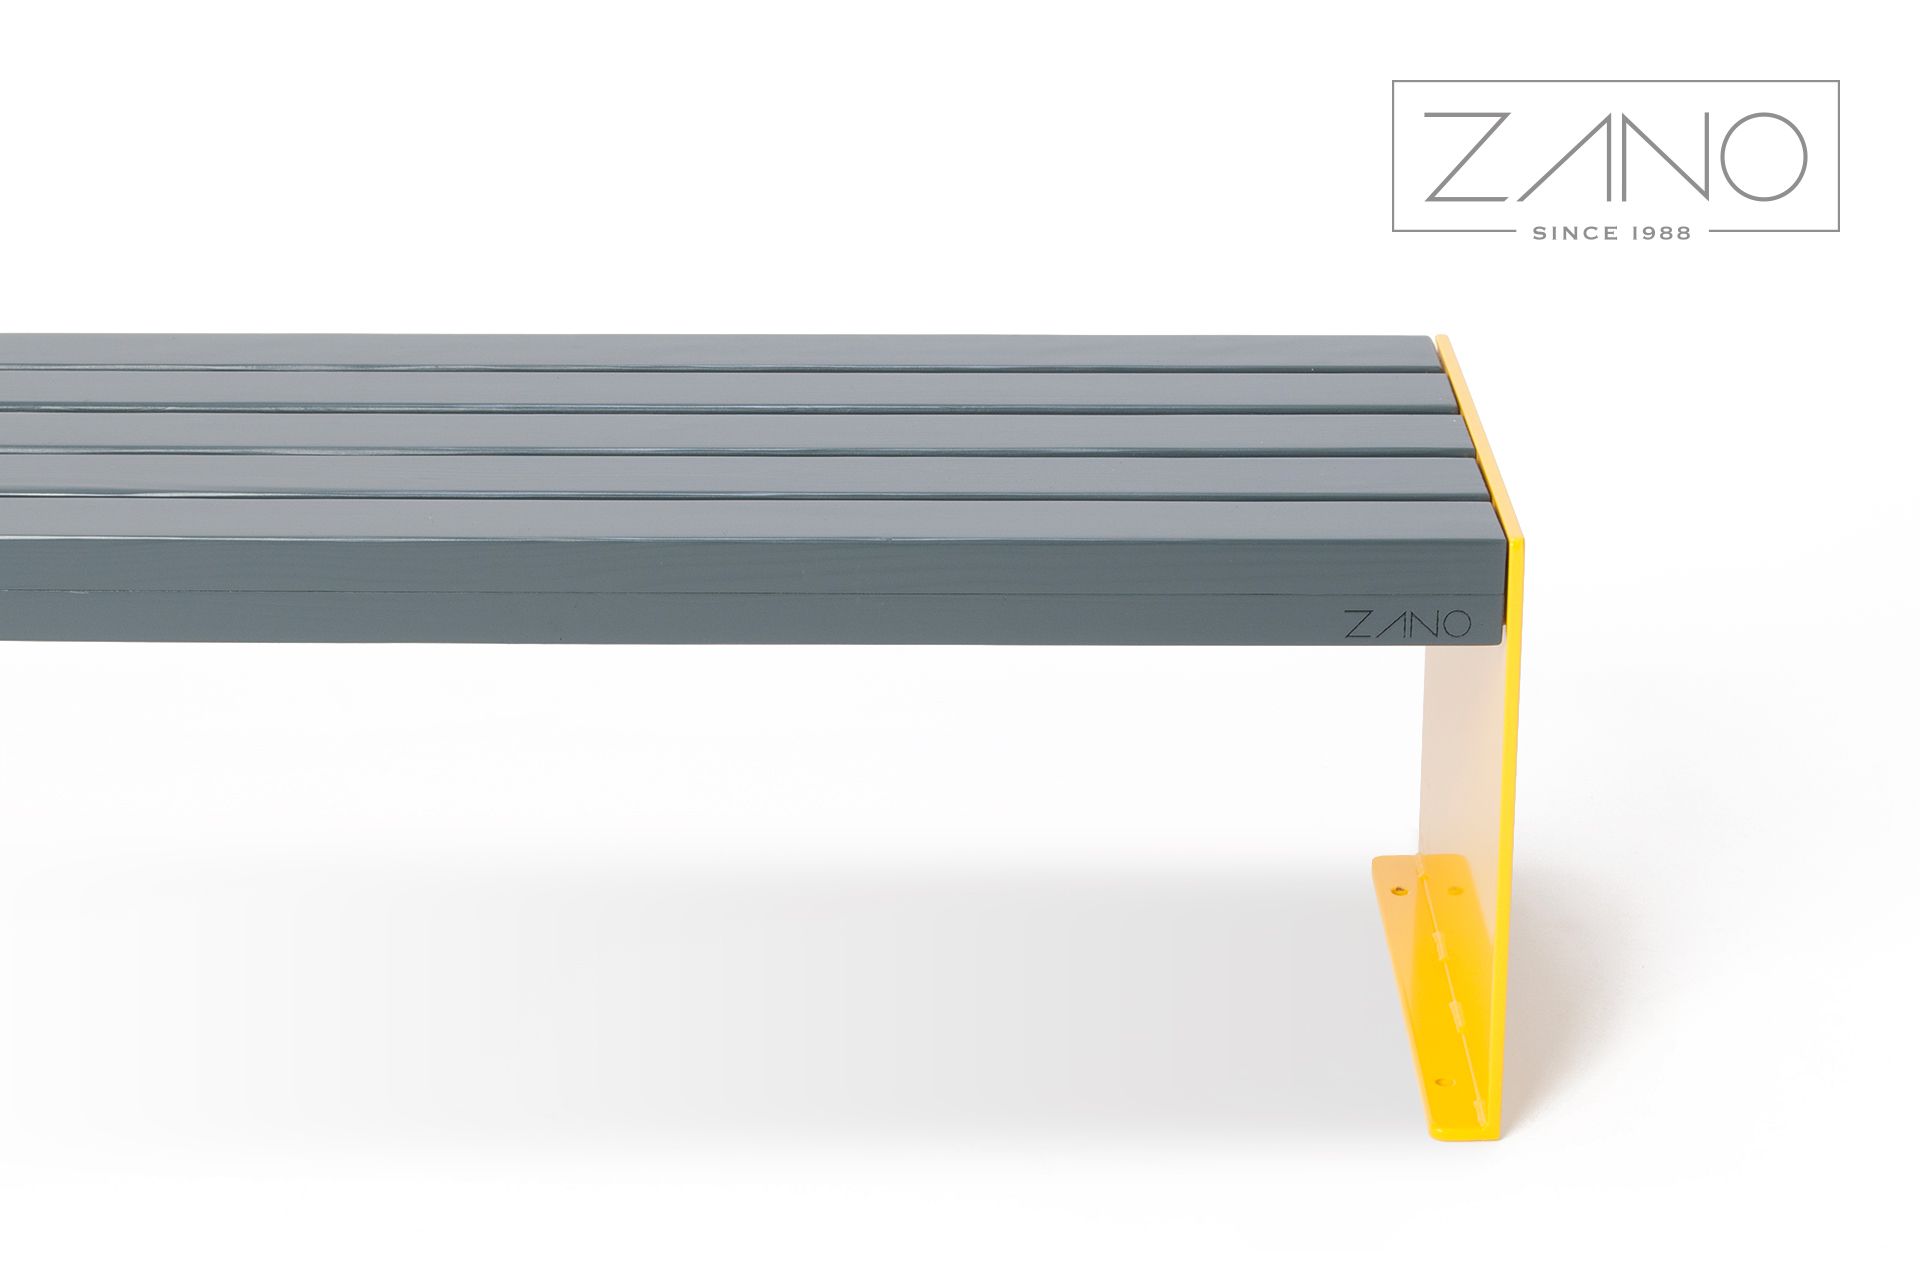 "Simple" street bench made of steel and wood